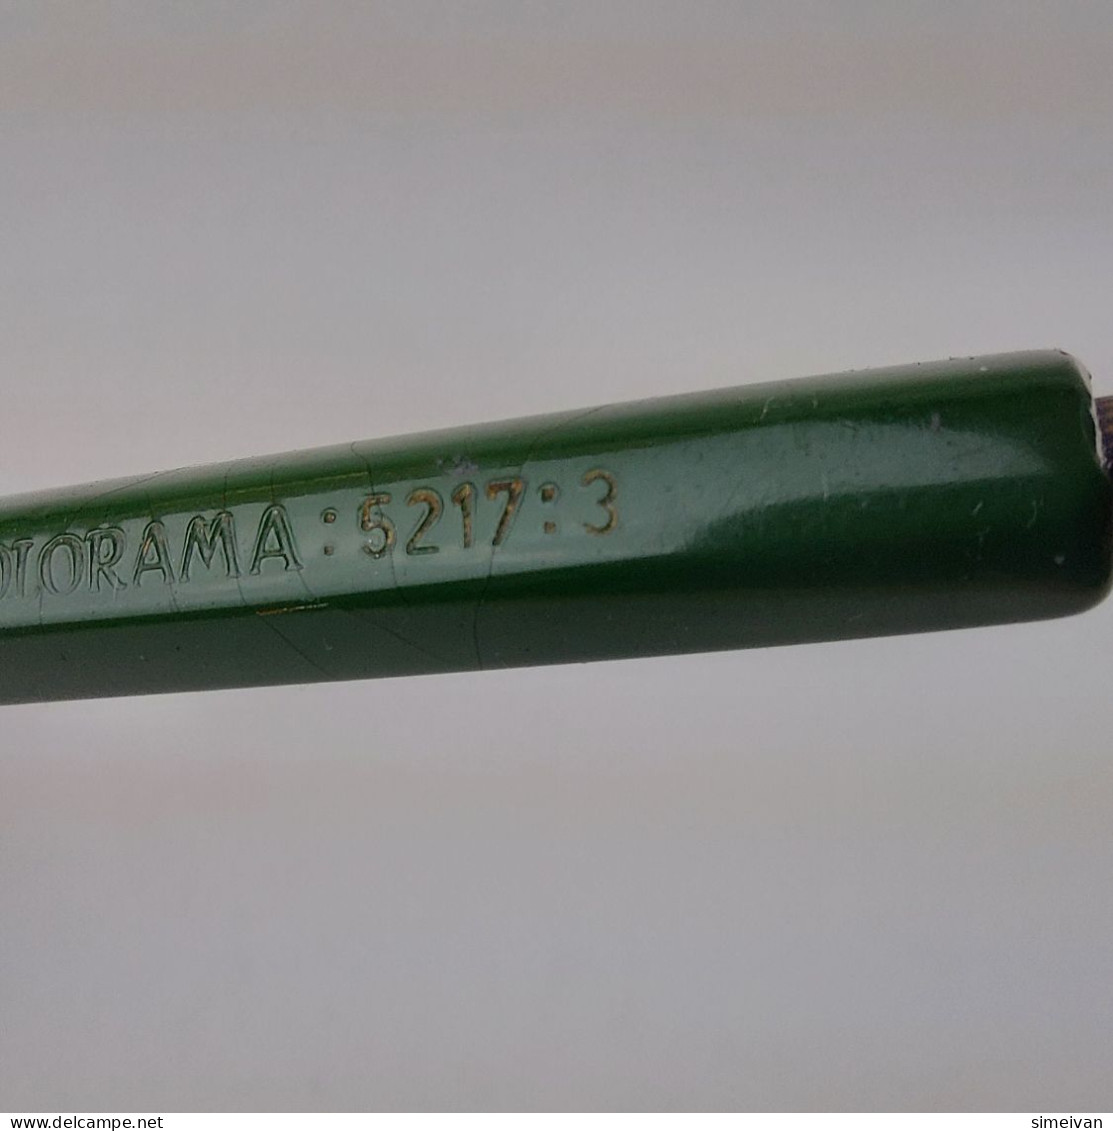 Vintage Mechanical Pencil TOISON D'OR COLORAMA 5217:3 Bohemia Works Green #5492